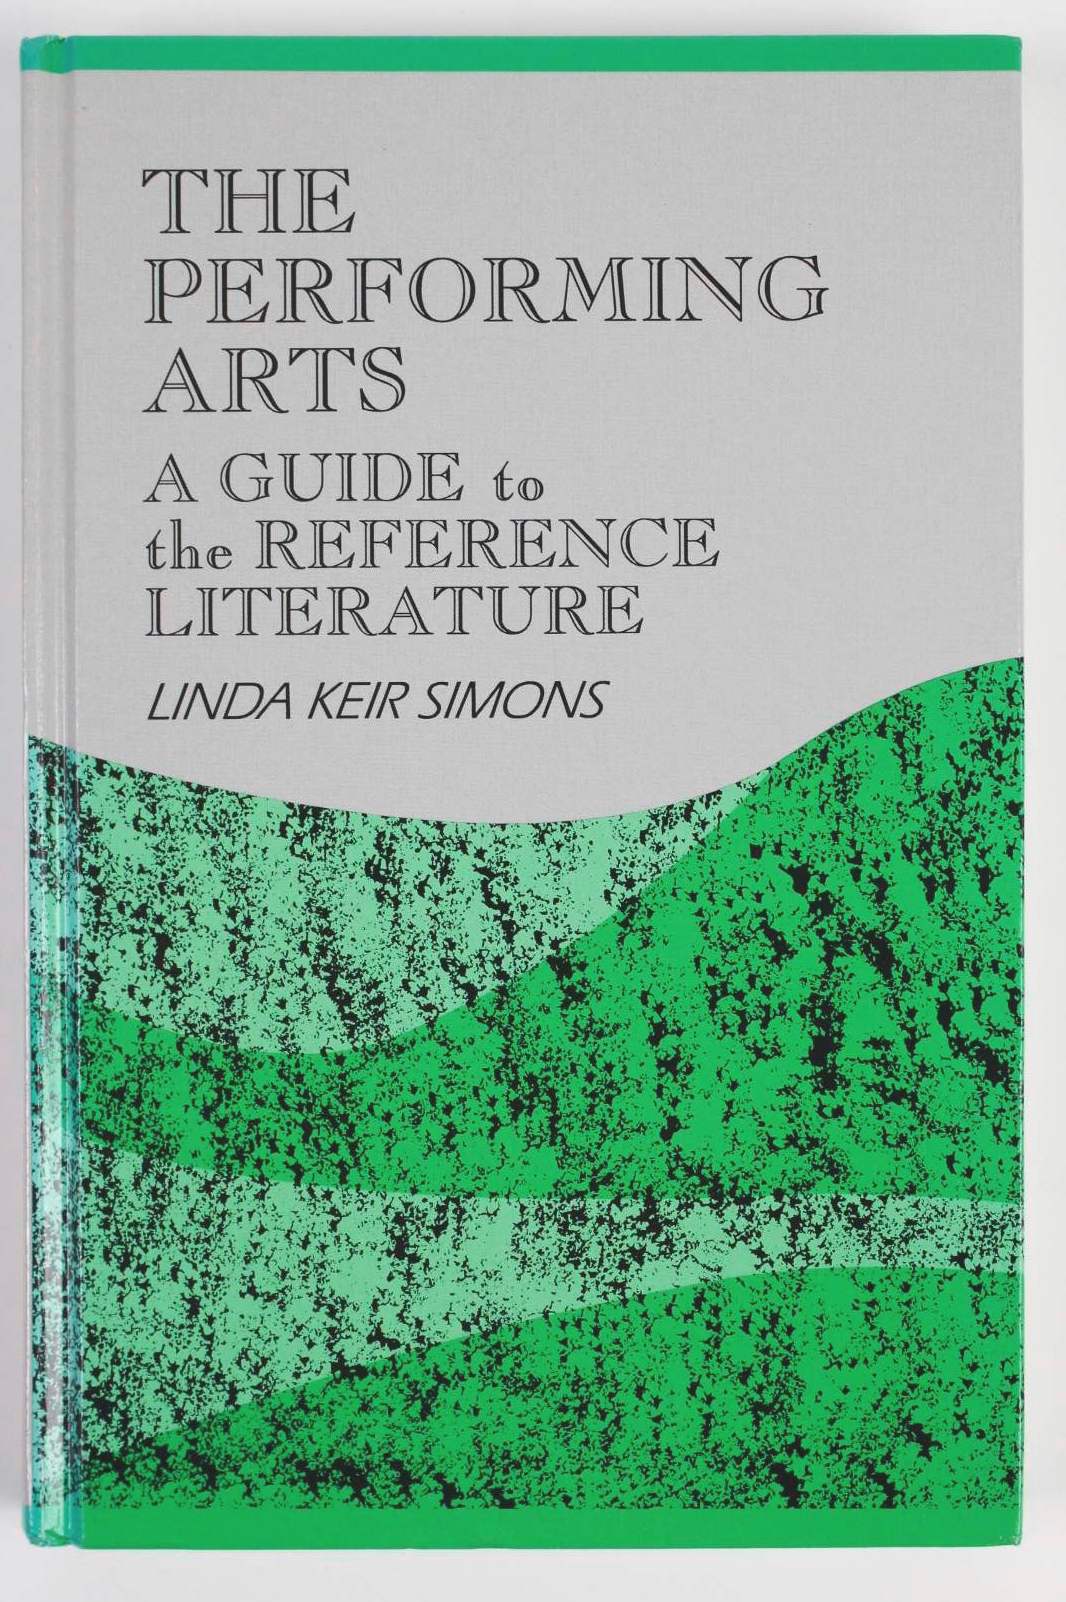 The Performing Arts: A Guide to the Reference Literature (Reference Sources in the Humanities Series) - Rettig, James and Linda K. Simons